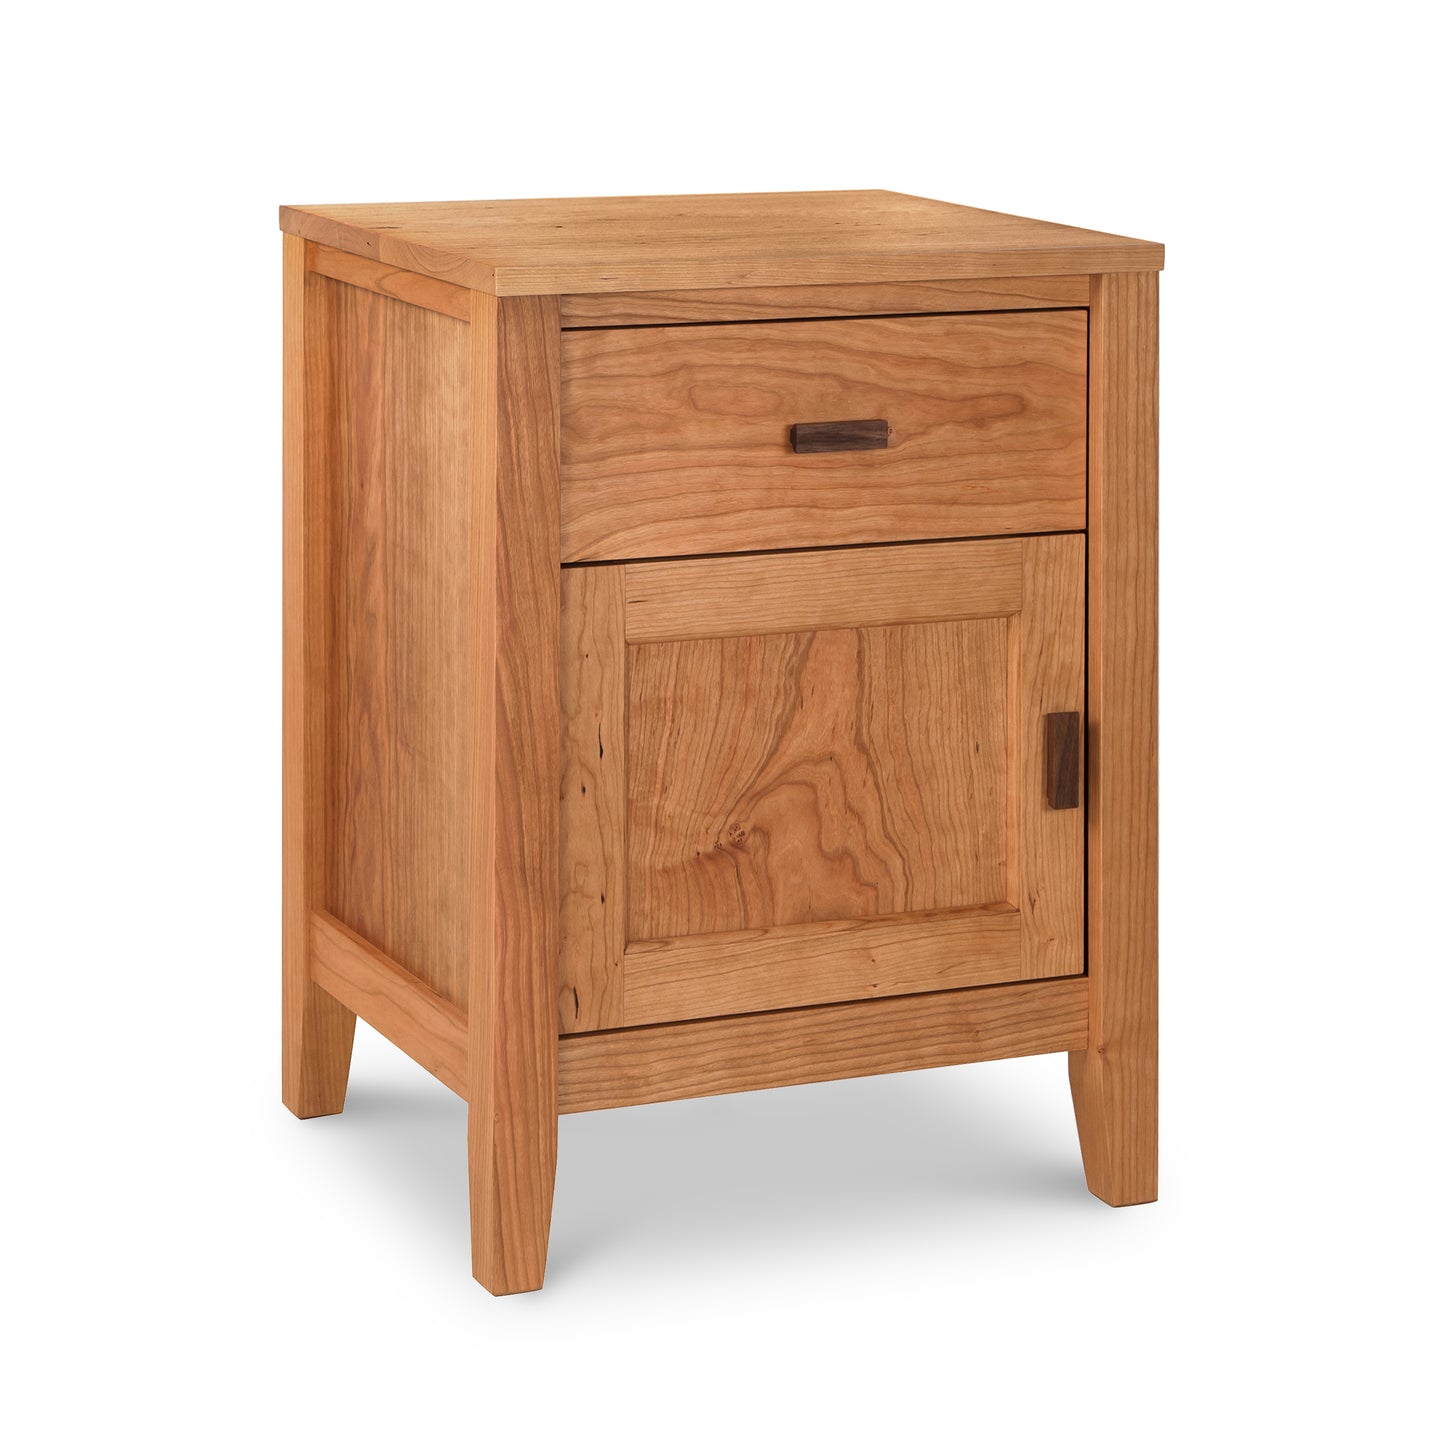 The Maple Corner Woodworks Andover Modern 1-Drawer Nightstand with Door is a small wooden nightstand made from sustainably sourced hardwoods.